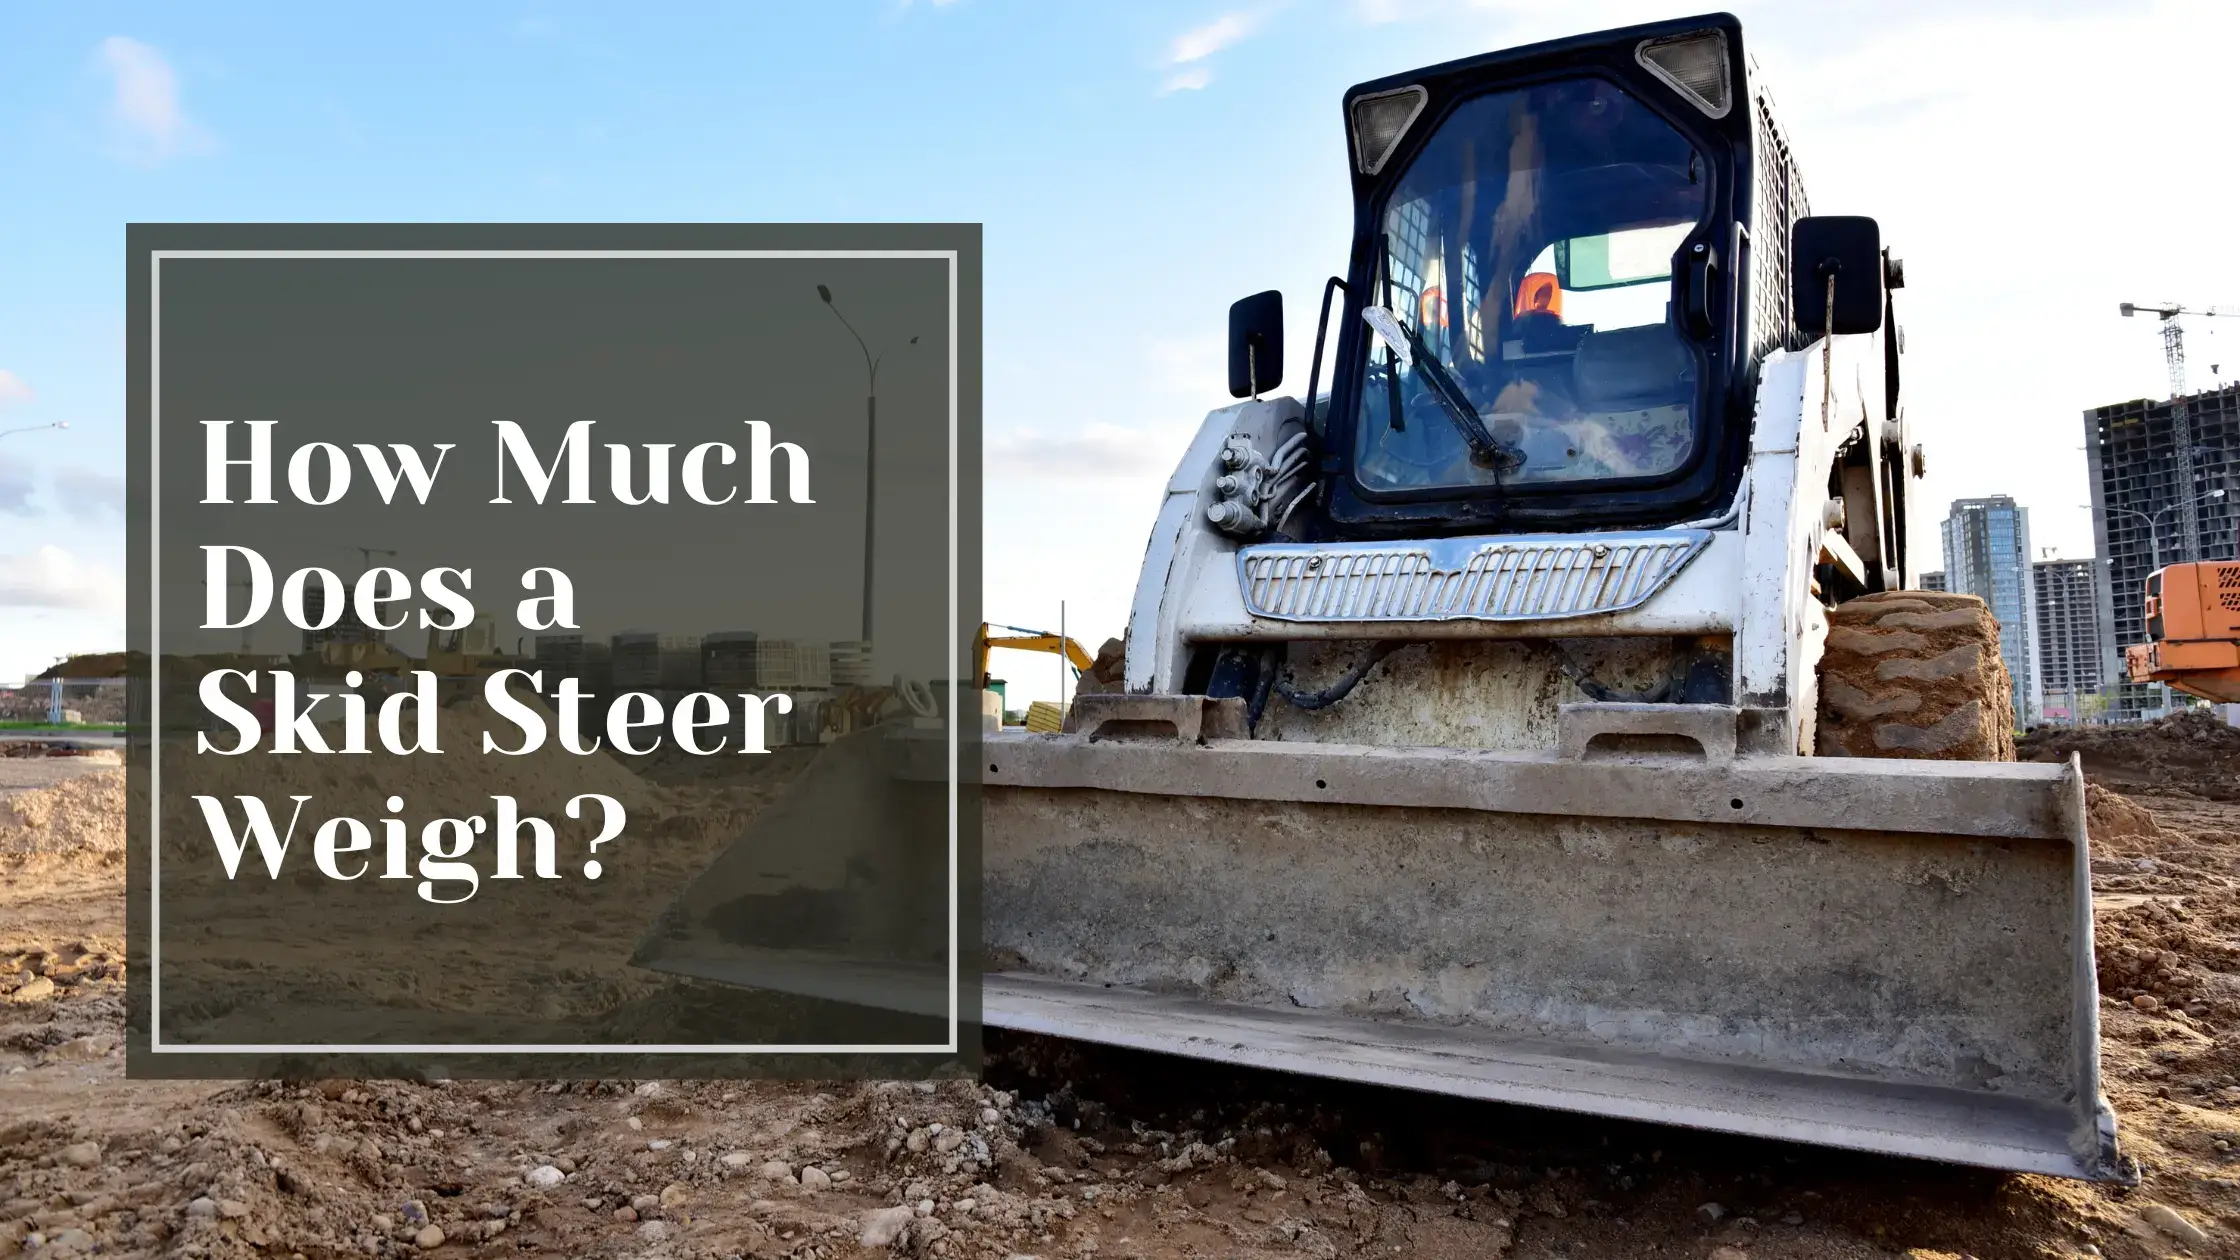 How Much Does a Skid Steer Weigh?